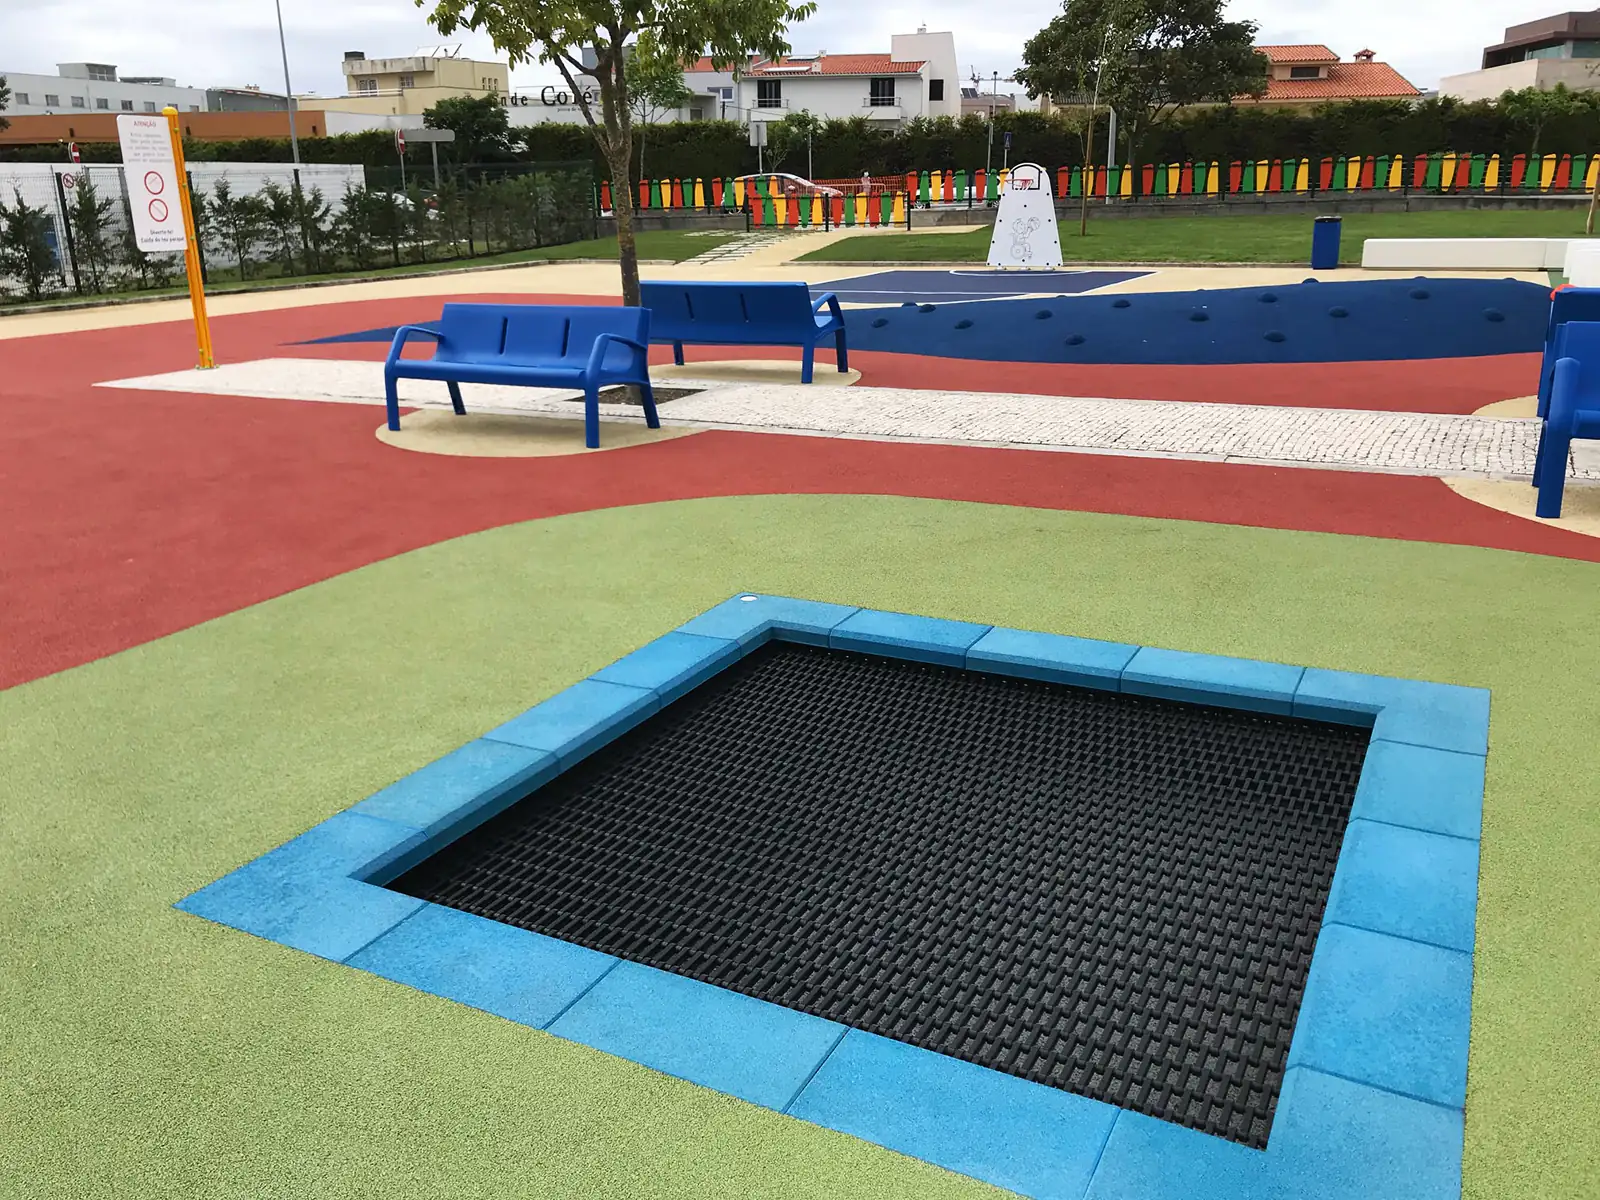 Benches for children's areas